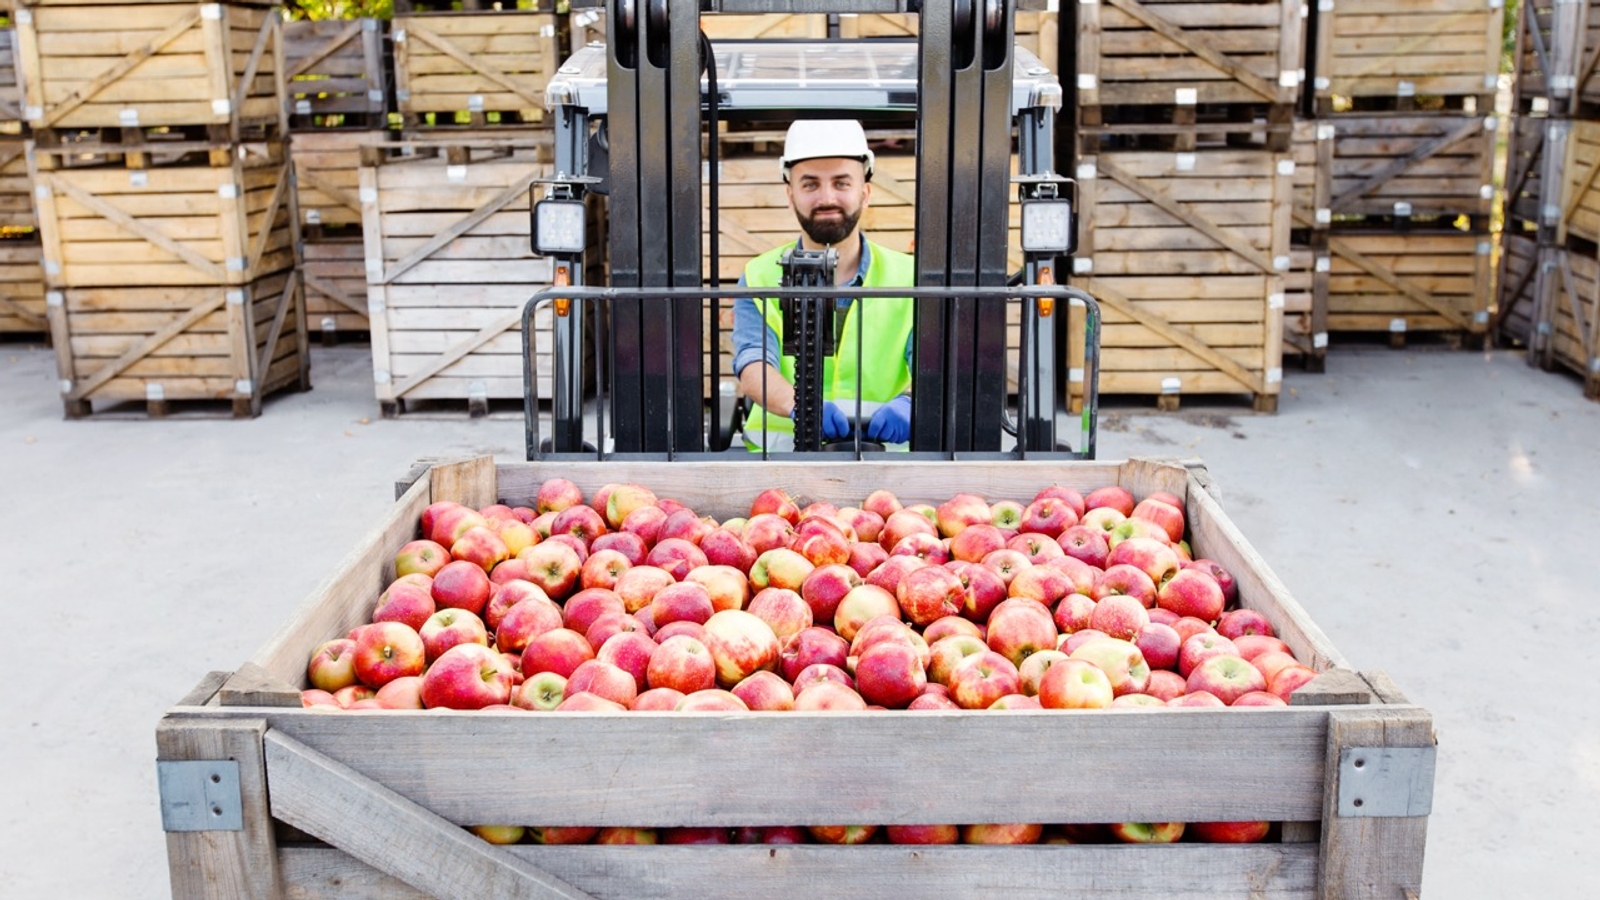 Boxes of apples in a crate on a forklift